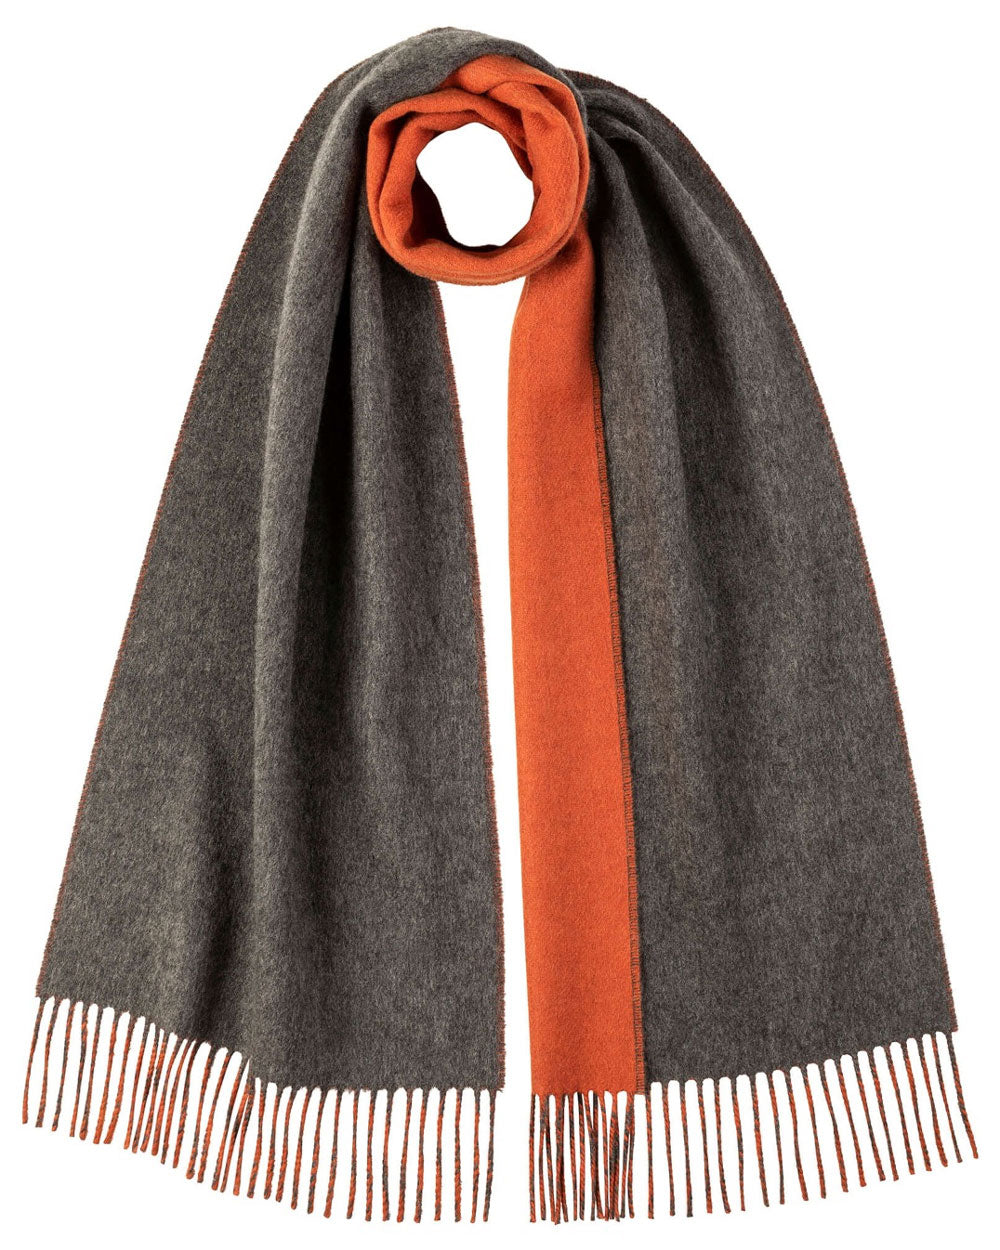 Cashmere Contrast Scarf in Grey and Orange